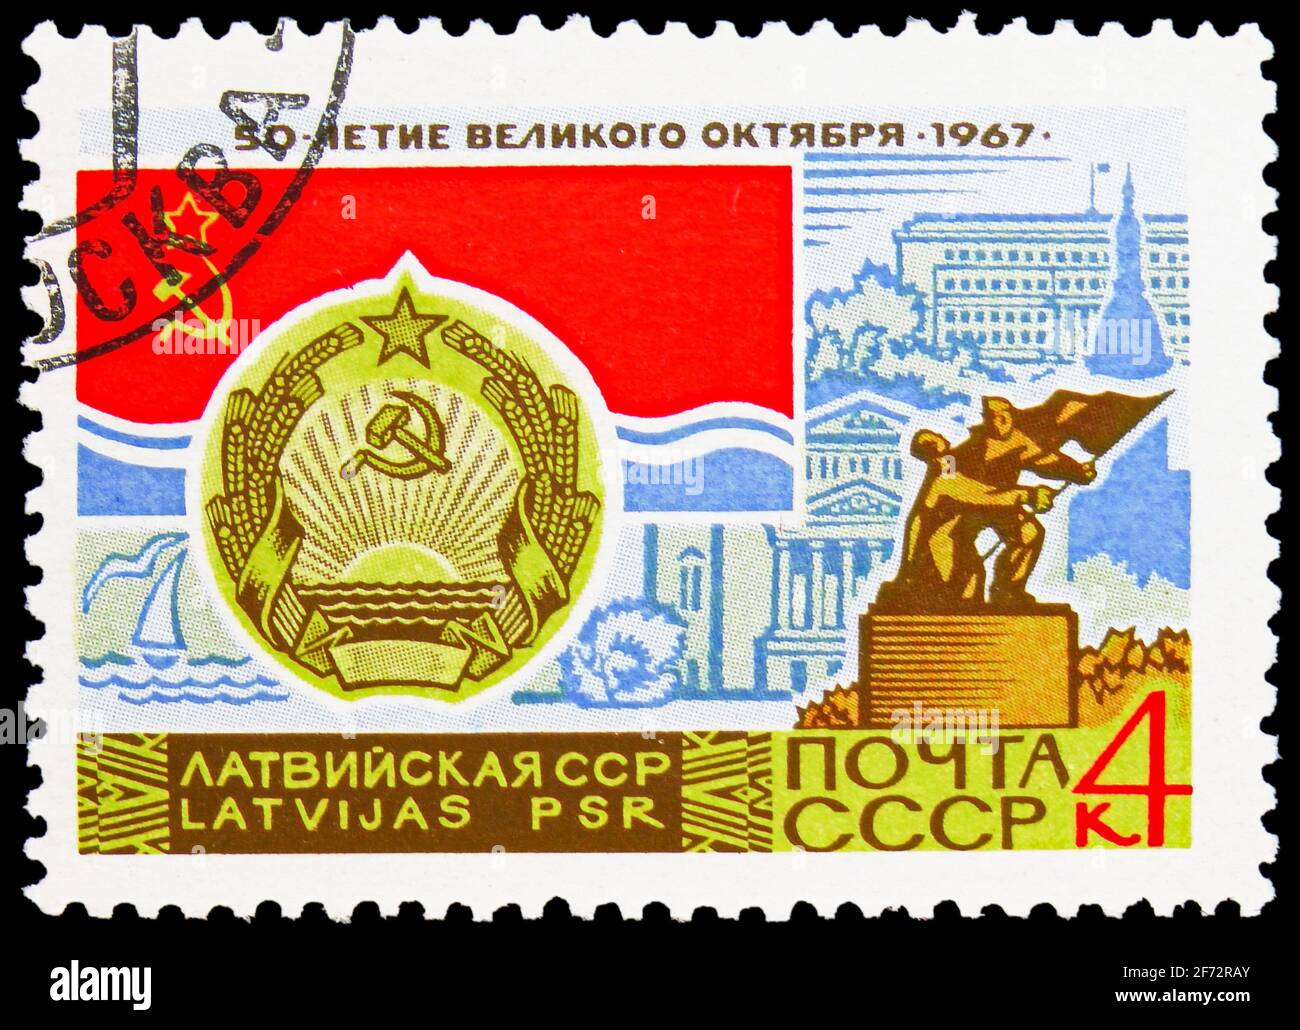 MOSCOW, RUSSIA - JANUARY 12, 2021: Postage stamp printed in USSR (Russia) shows Latvian SSR, 50th Anniversary of October Revolution (1st issue) serie, Stock Photo